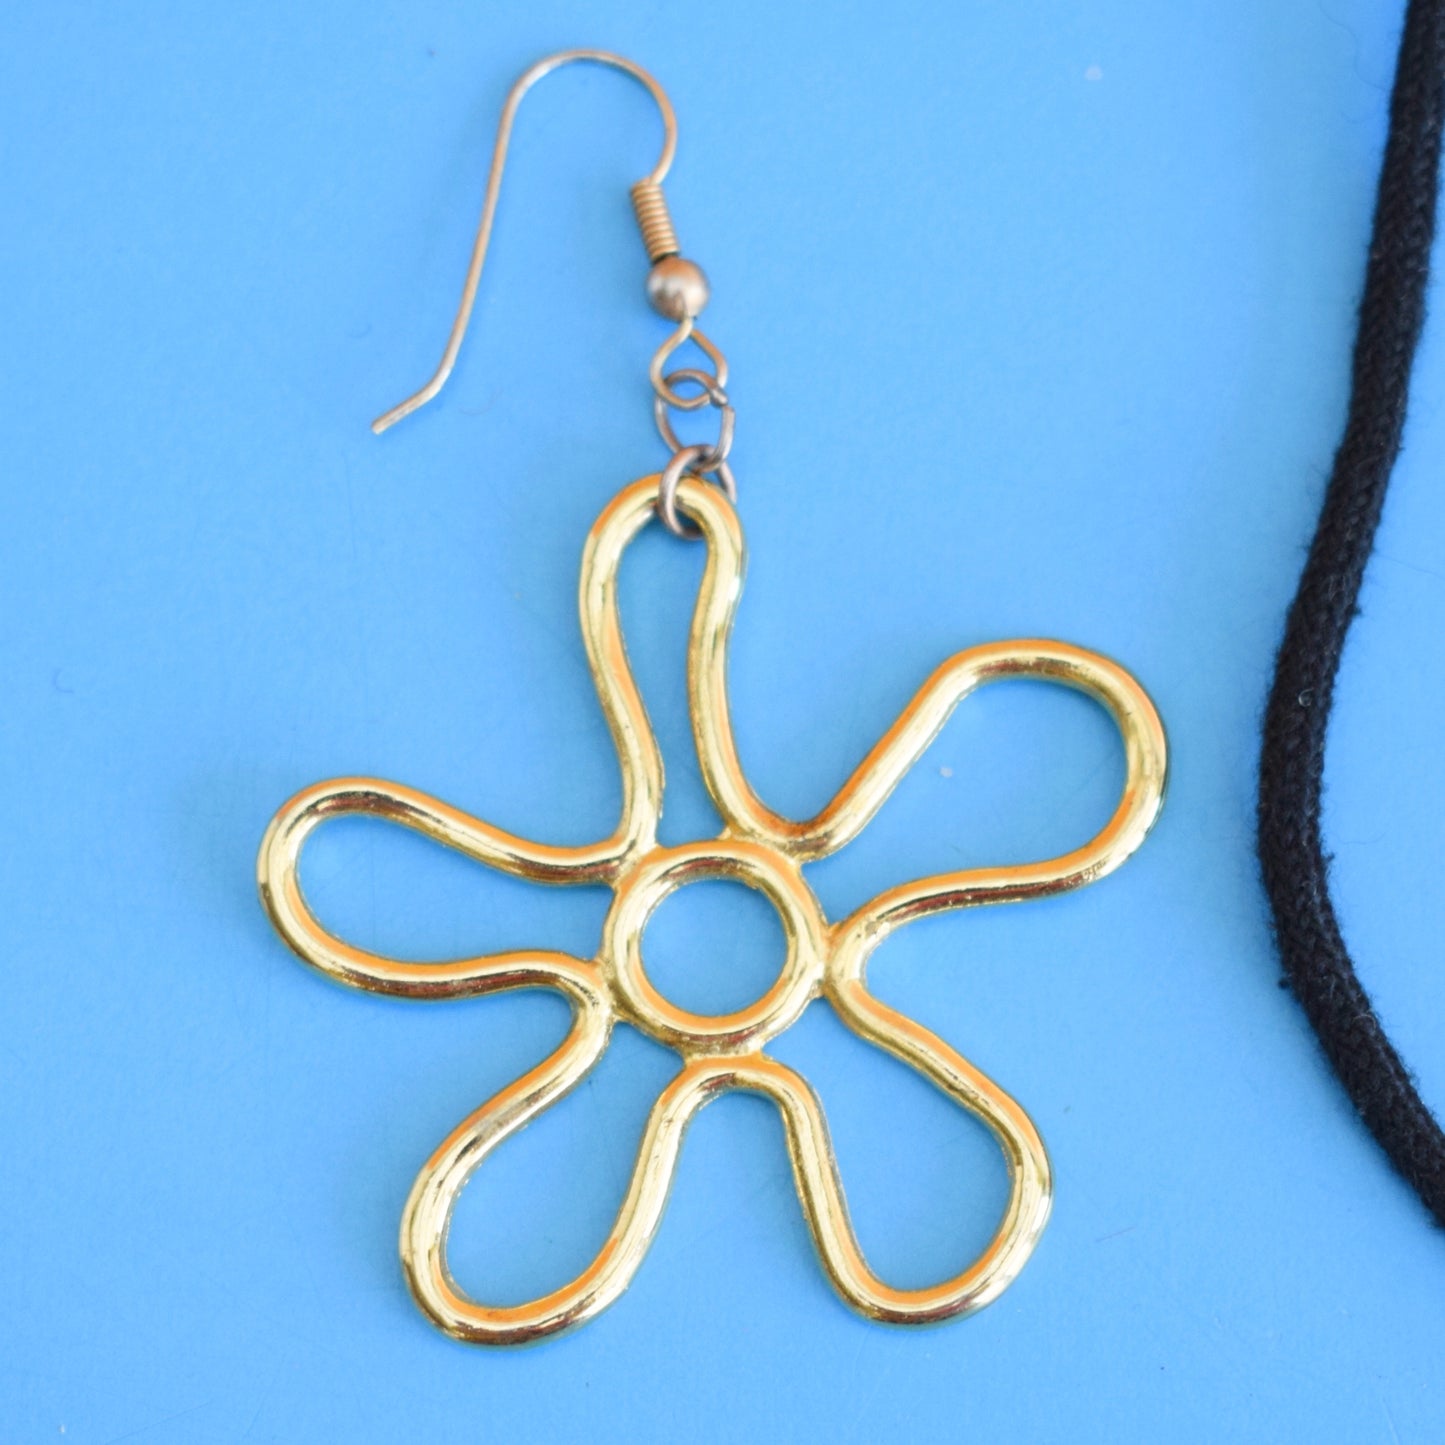 Vintage 1990s Necklace/ Earrings - Flower Power - Gold